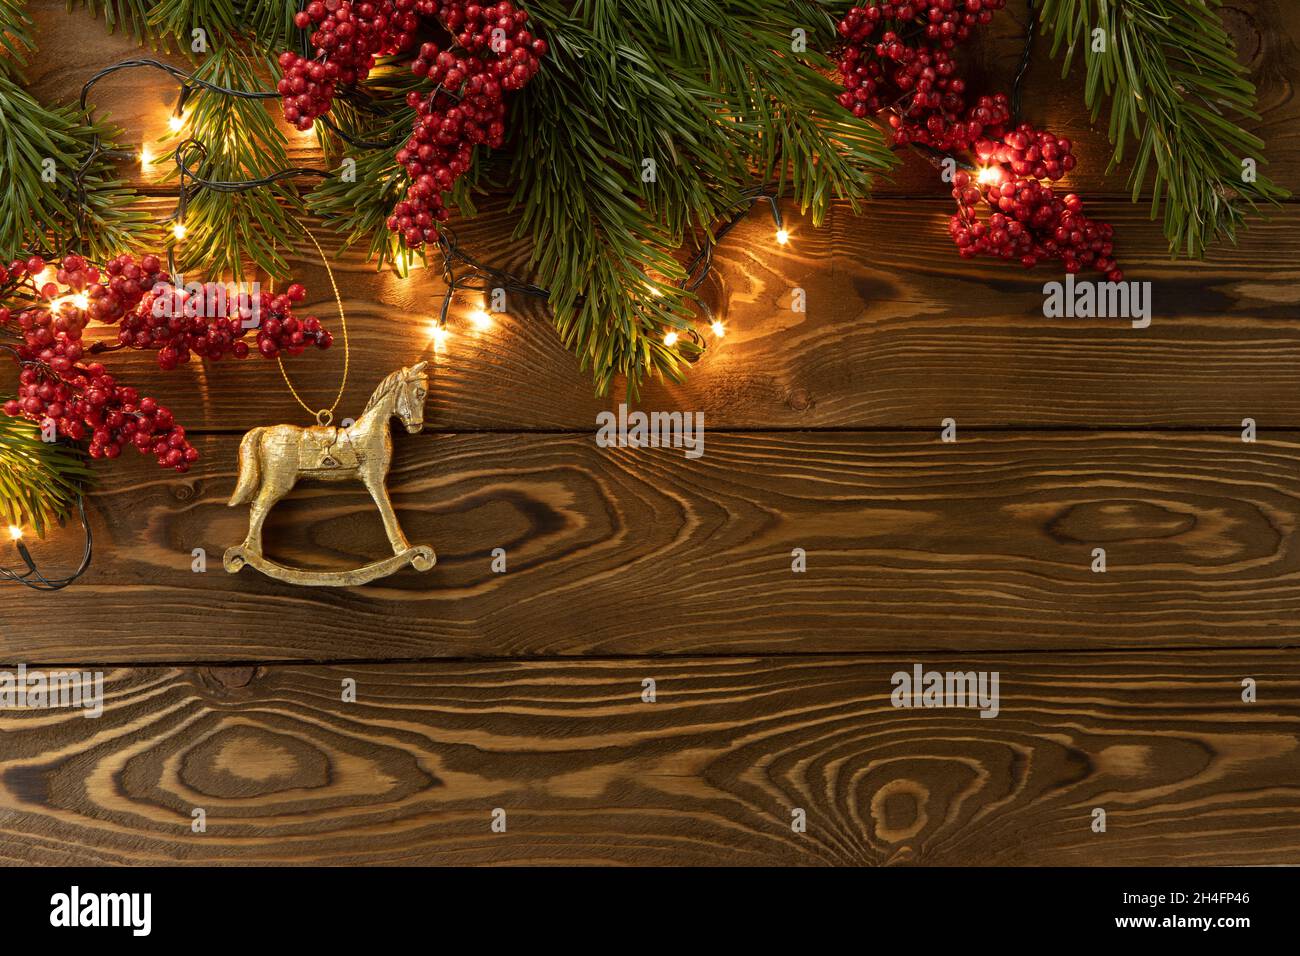 Christmas background. Nobilis fir branches, twigs with red berries, toy golden horse on brown wooden planks. Copy space, flat lay, top view. Holiday, Stock Photo